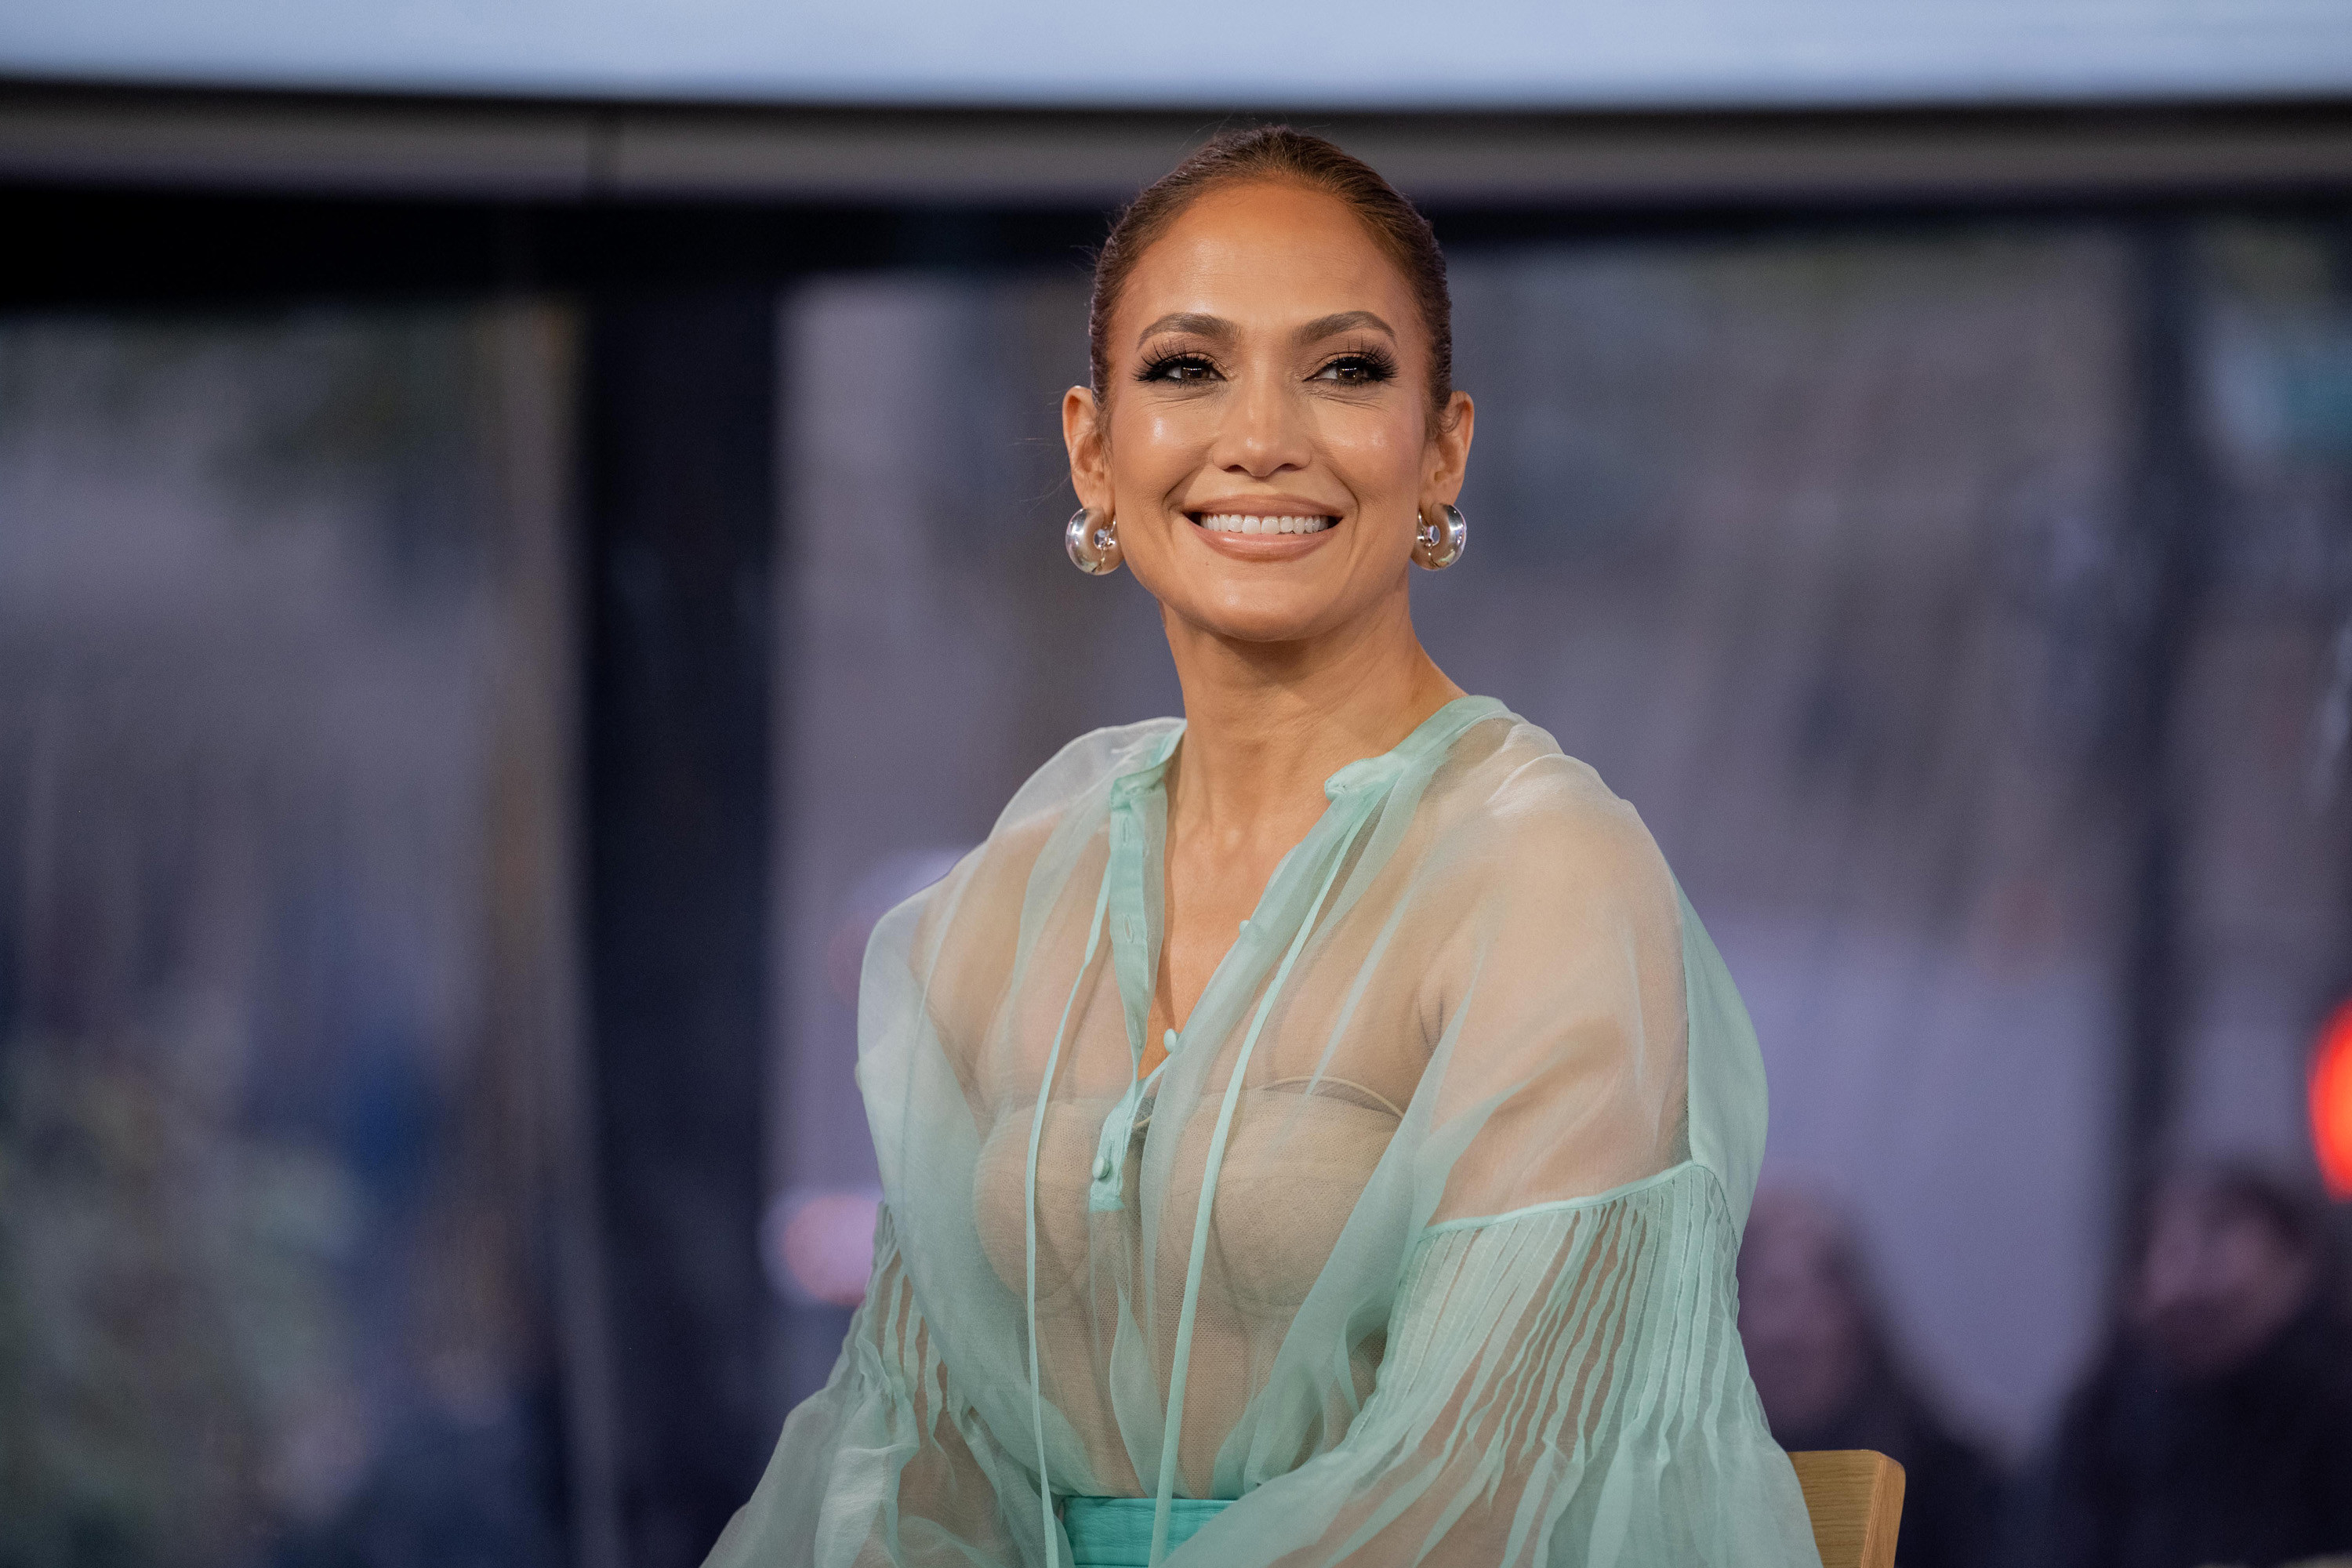 JLo smiling in a diaphanous outfit